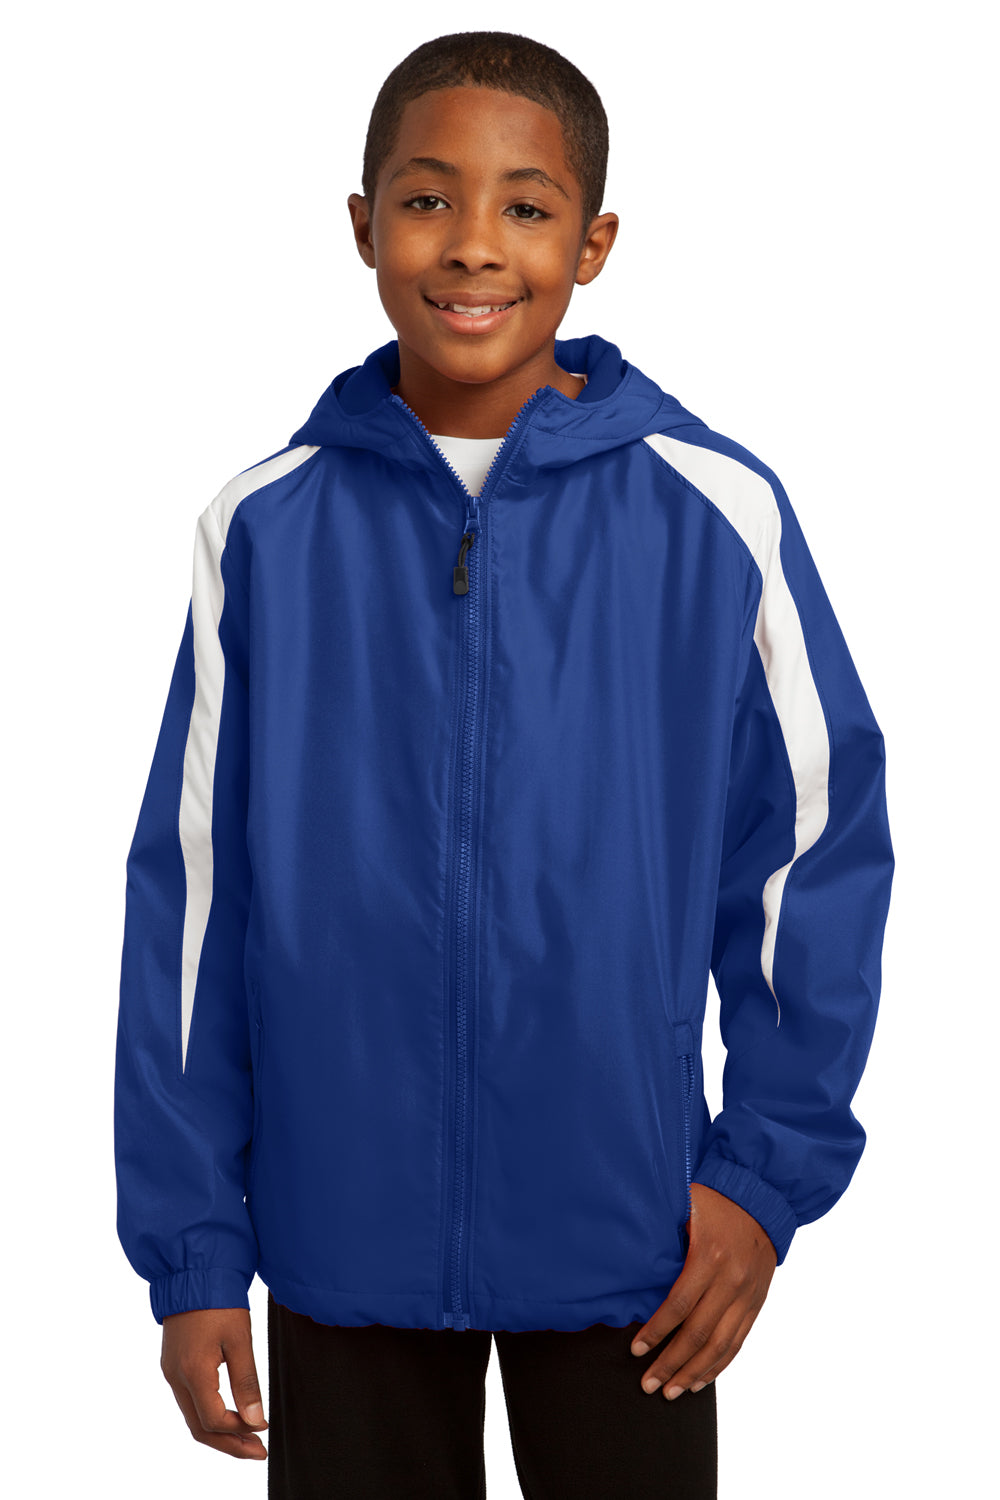 Youth Jackets-Hooded